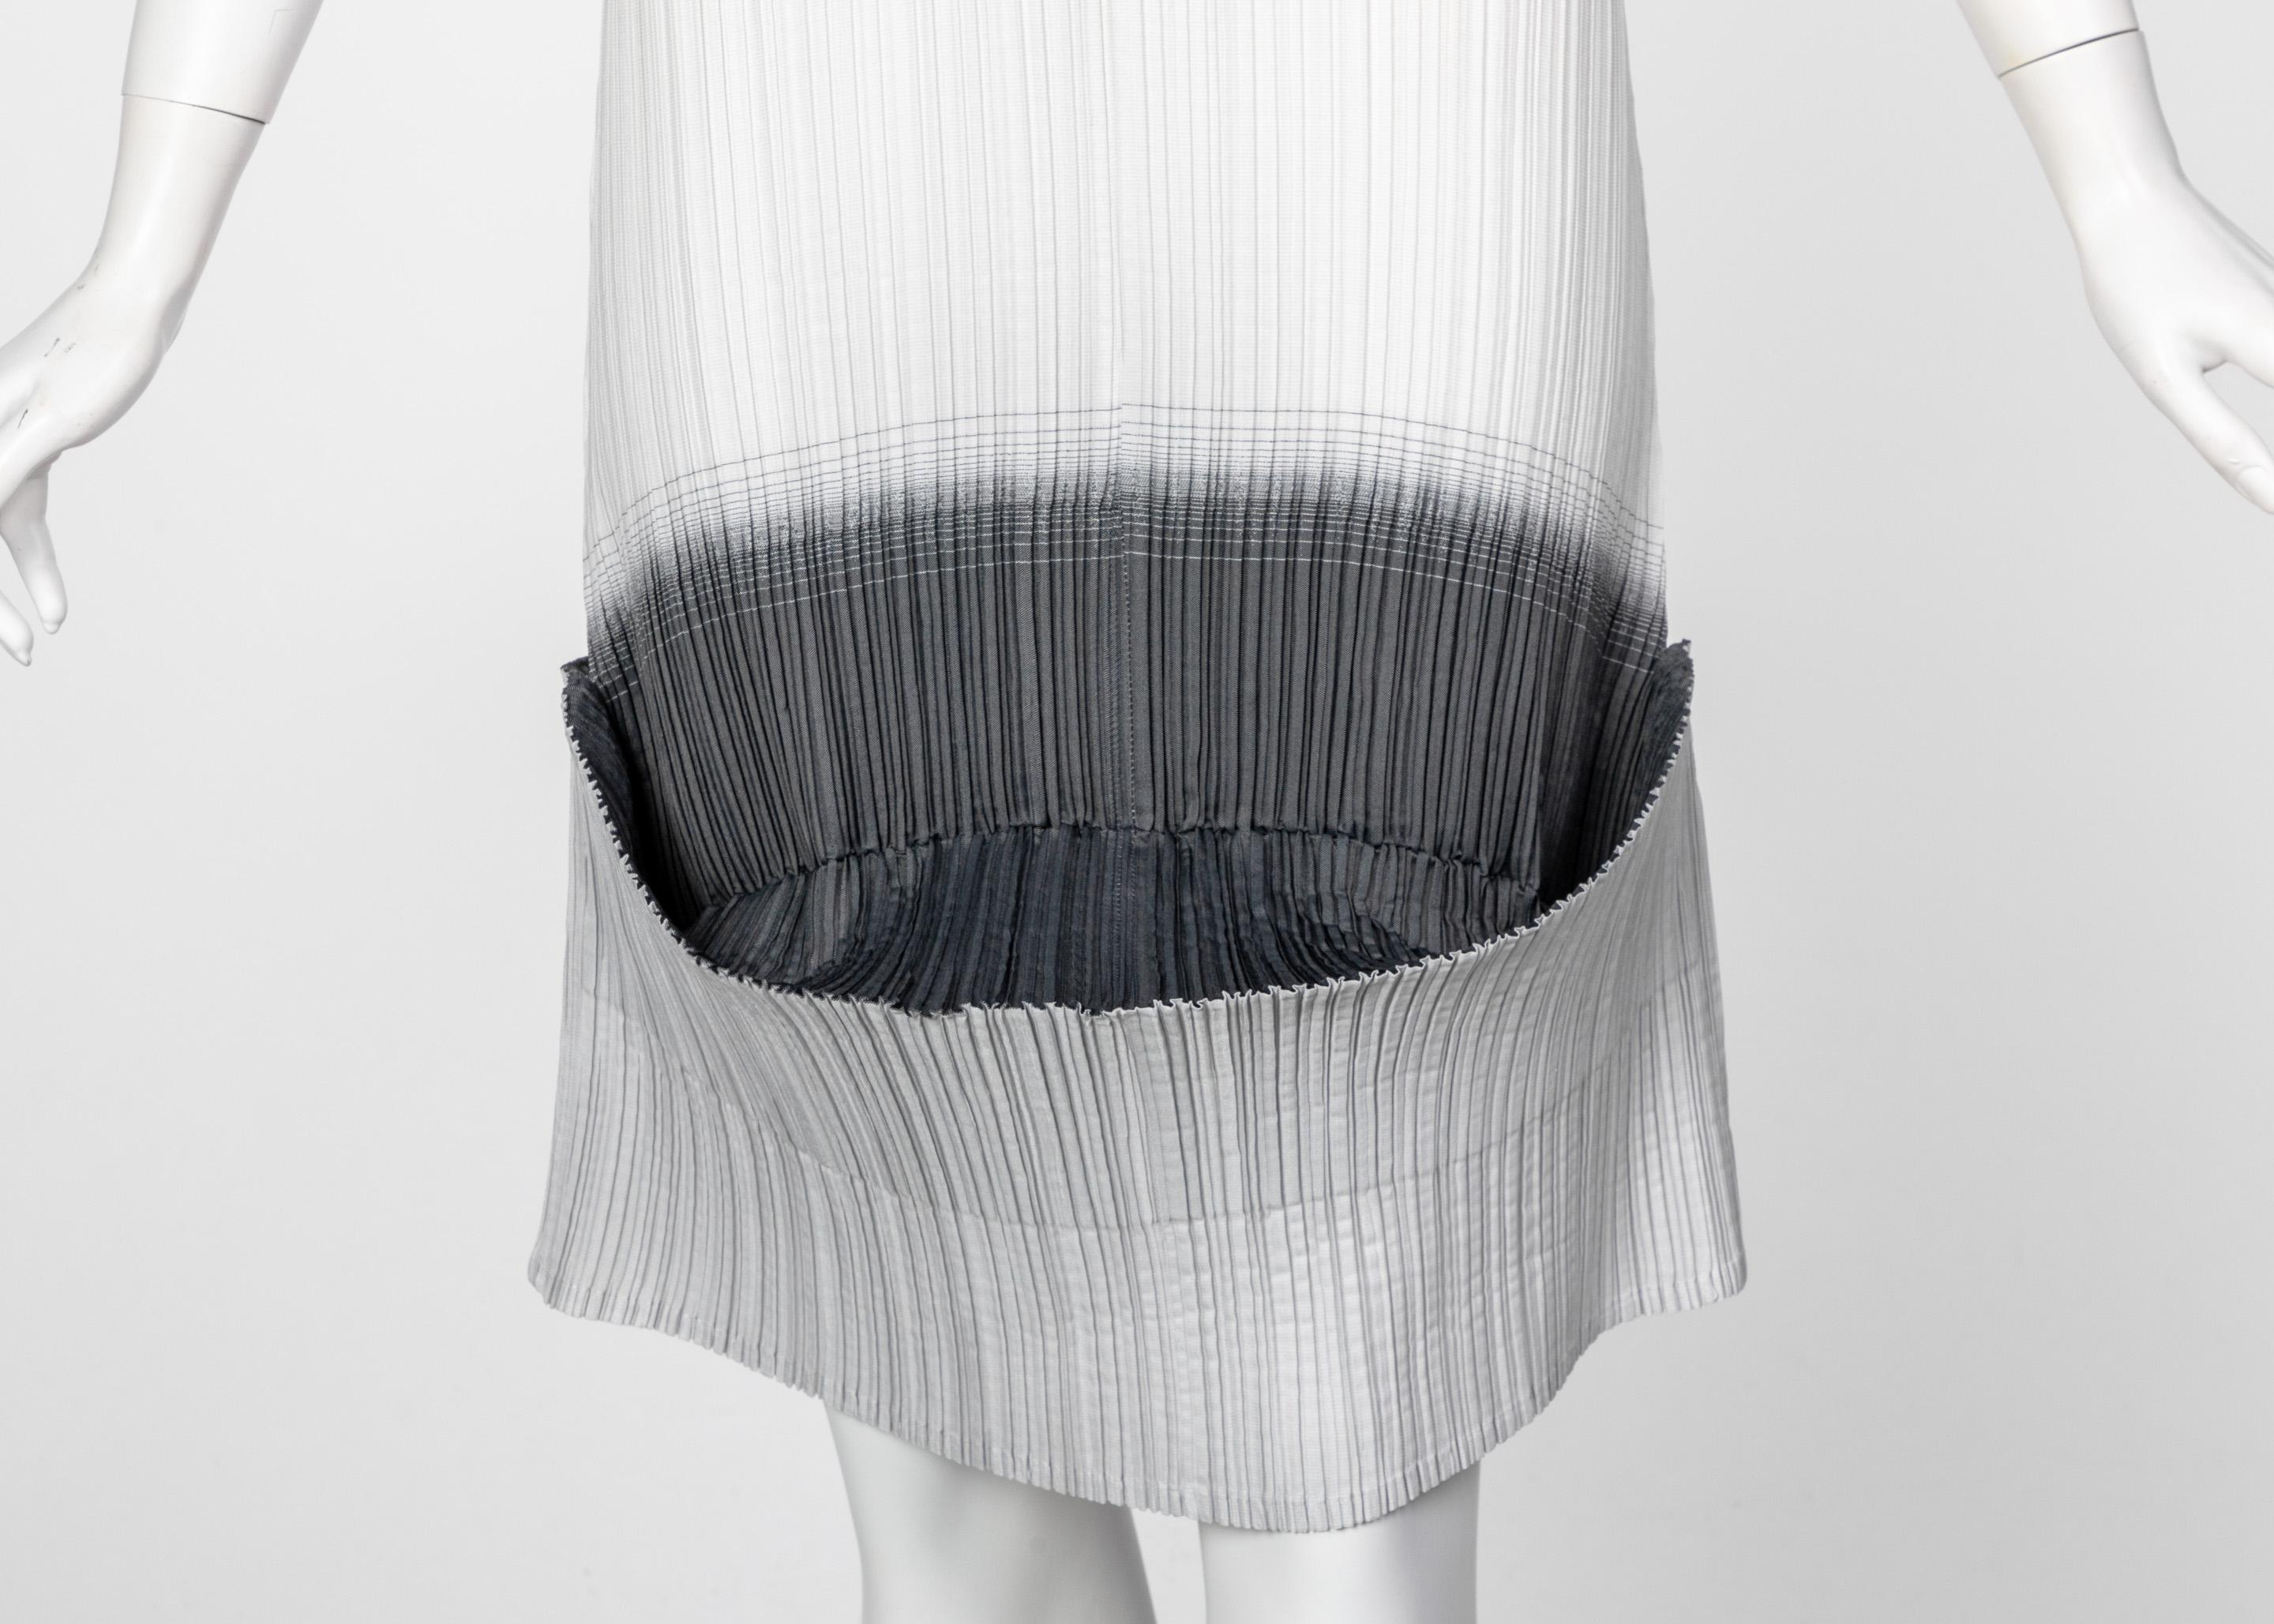 Issey Miyake “A Piece of Cloth” 2-Way White Gray Sleeveless Sculptural Dress For Sale 4